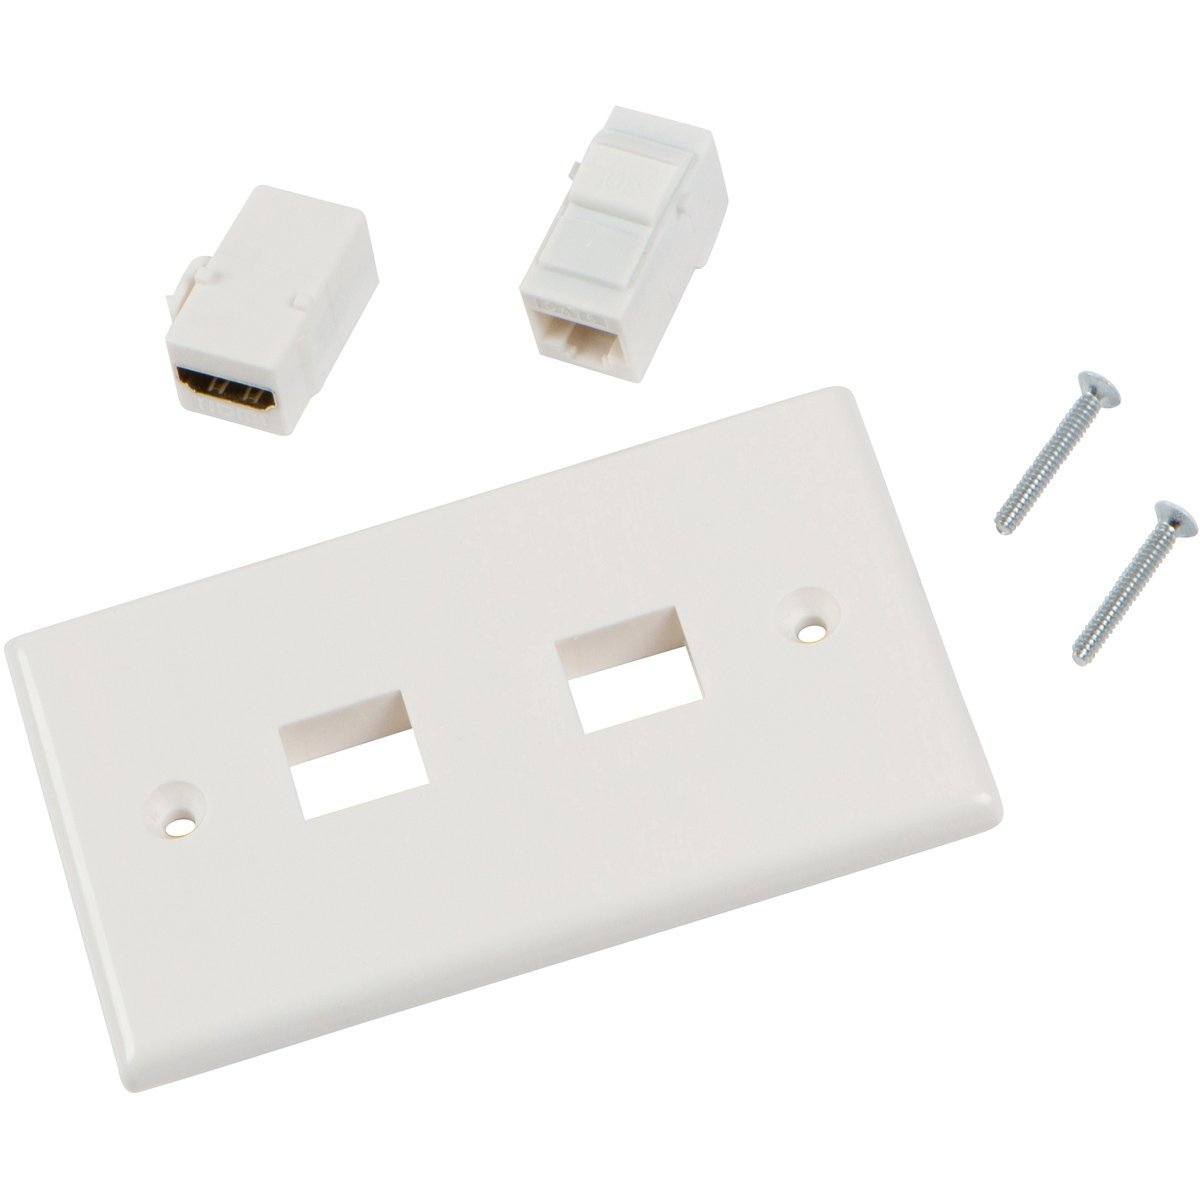 5, White UL Listed Buyer's Point HDMI and Cat6 Ethernet RJ45 Wall Plate 